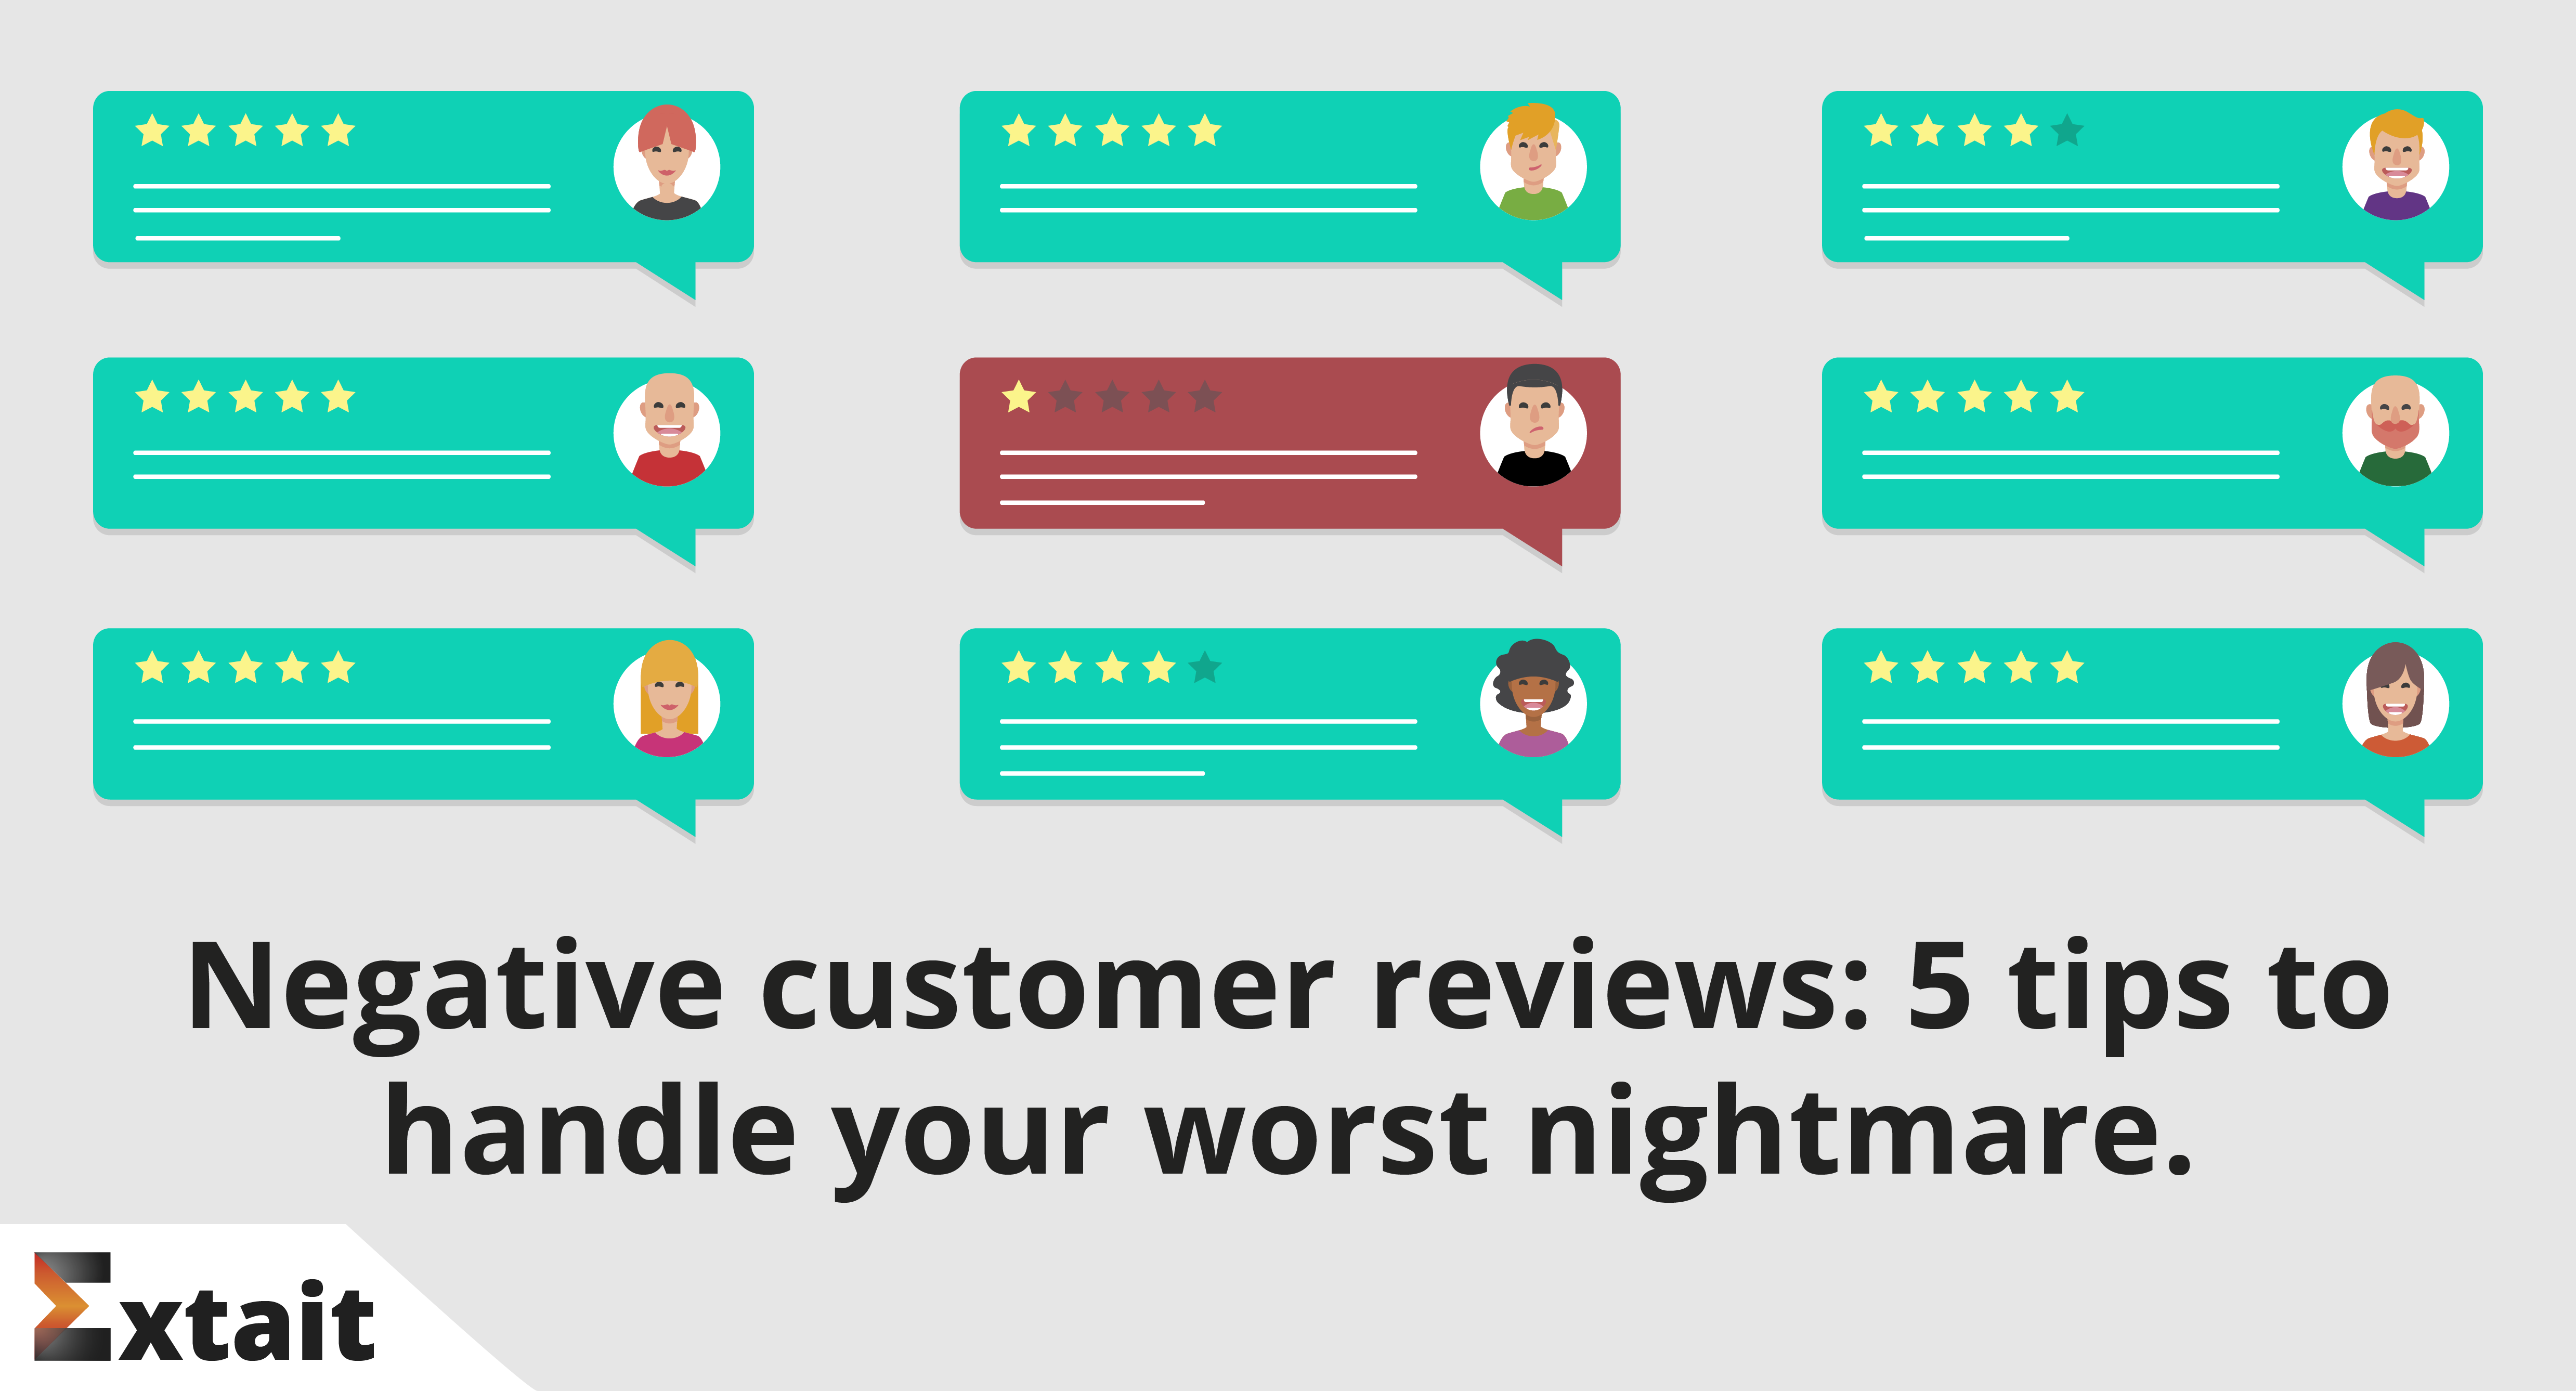 How To Respond To Negative Reviews and Win Back Customers 